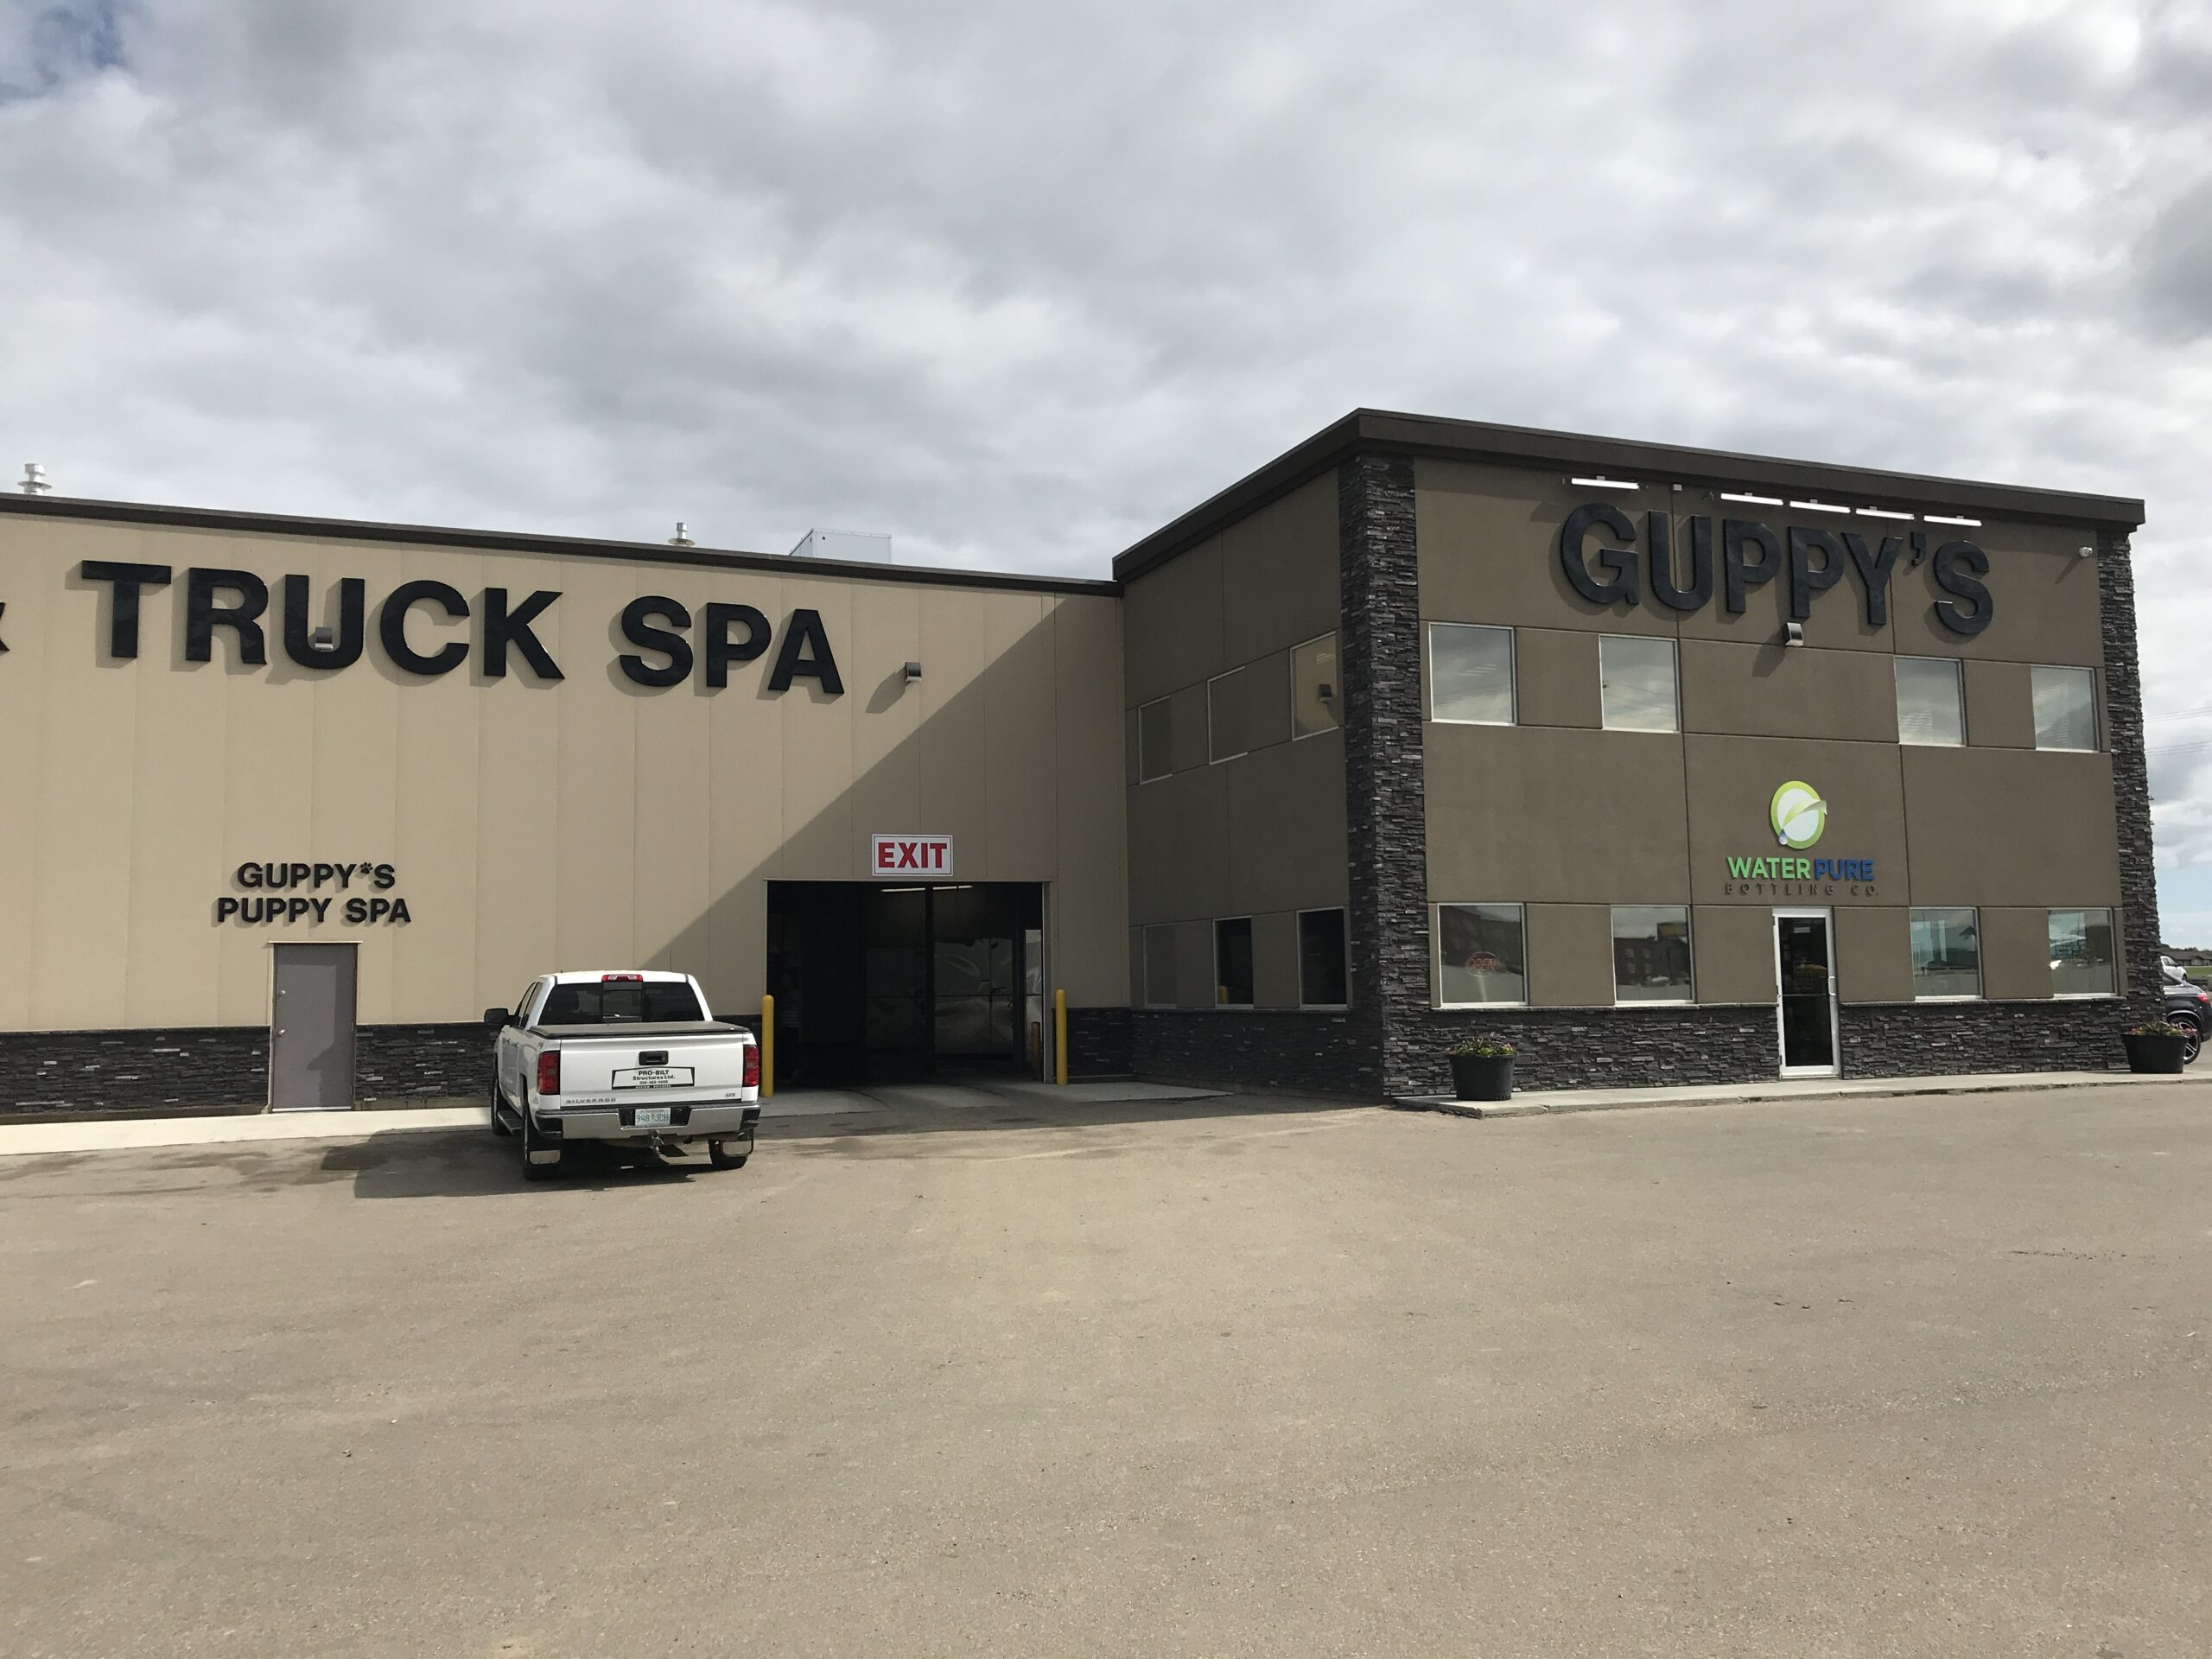 Guppys Car and Truck Spa (2)